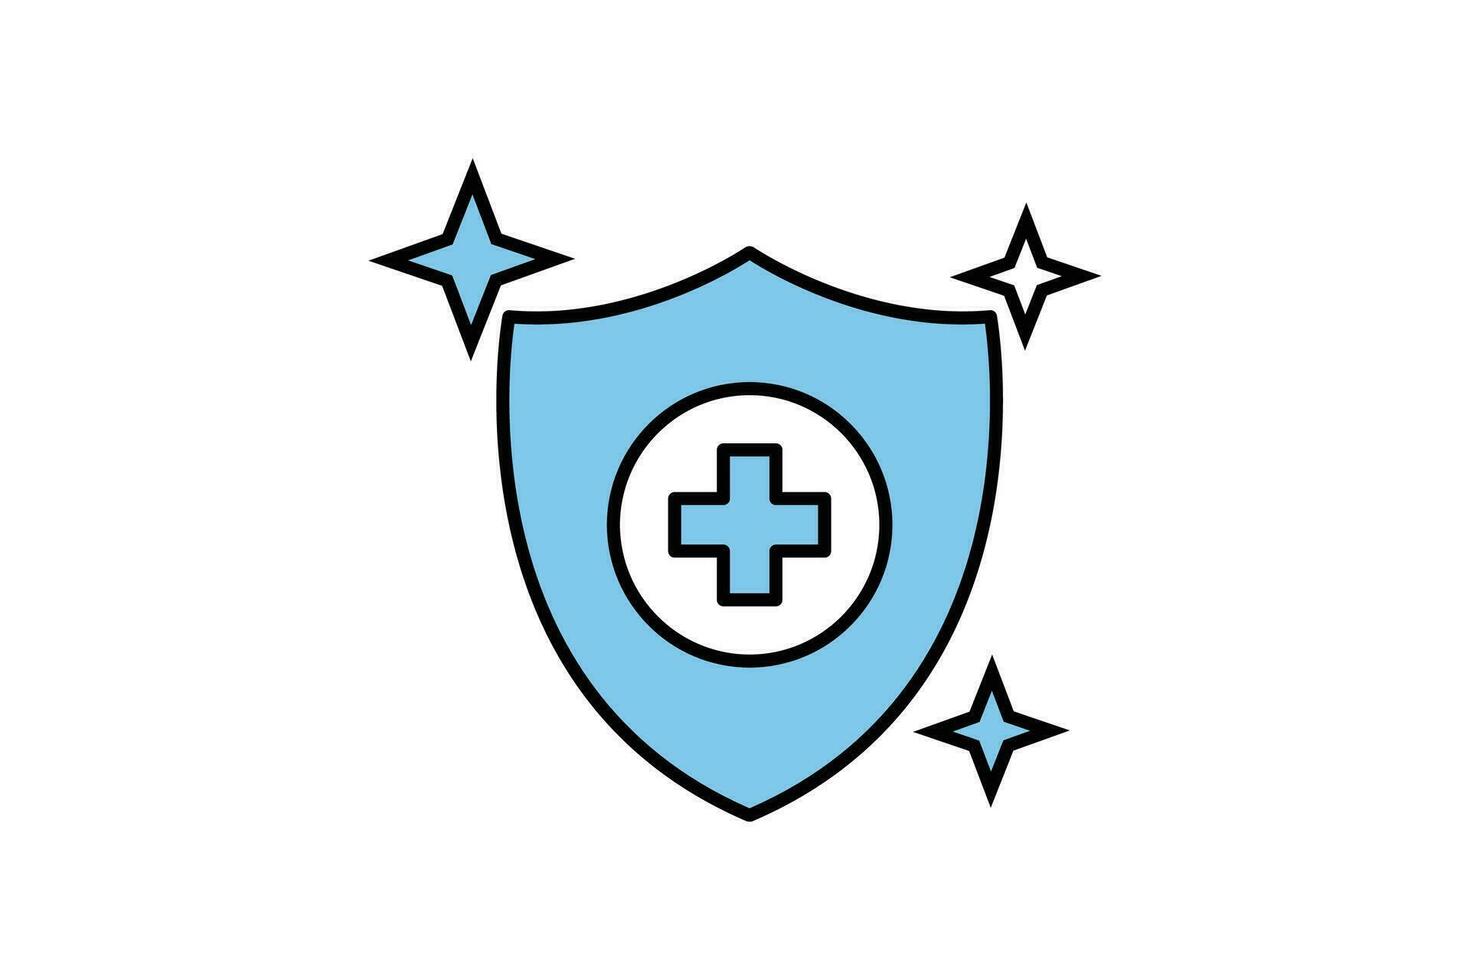 Hygiene protection icon. shield and health cross. icon related to hygiene. Two tone icon style design. Simple vector design editable